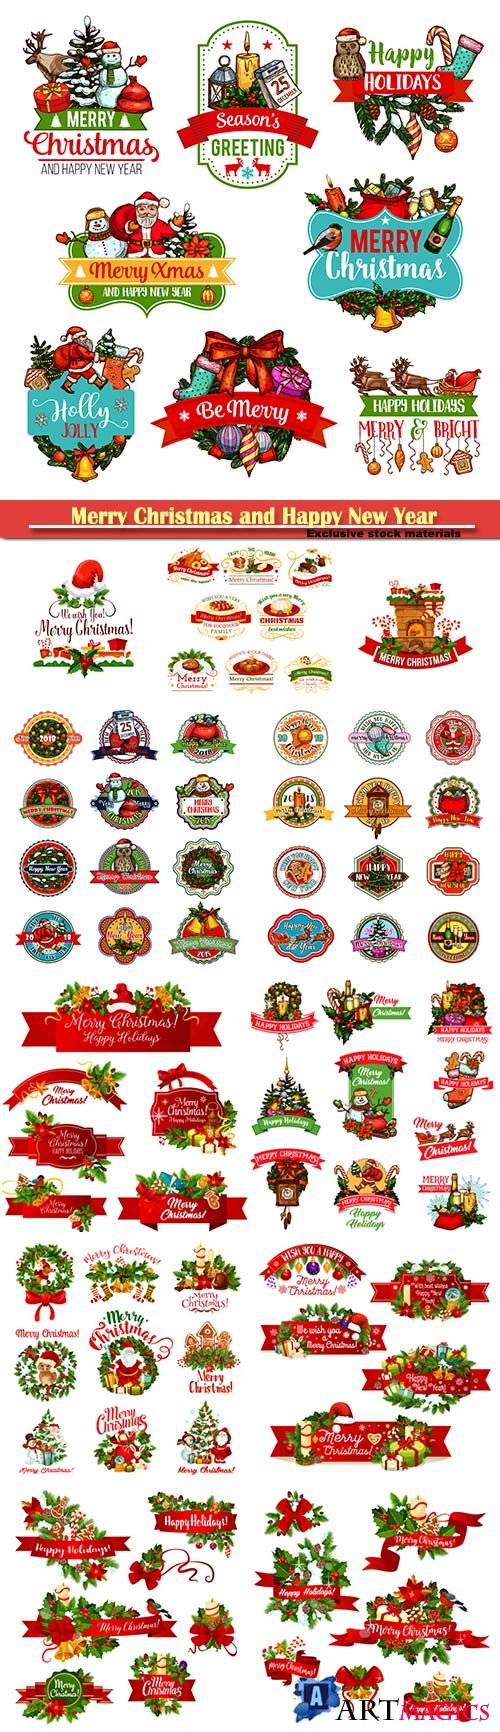 Merry Christmas and Happy New Year wish icons, Christmas tree garland decorations of holly wreath with red ribbon, golden bells and Santa gifts